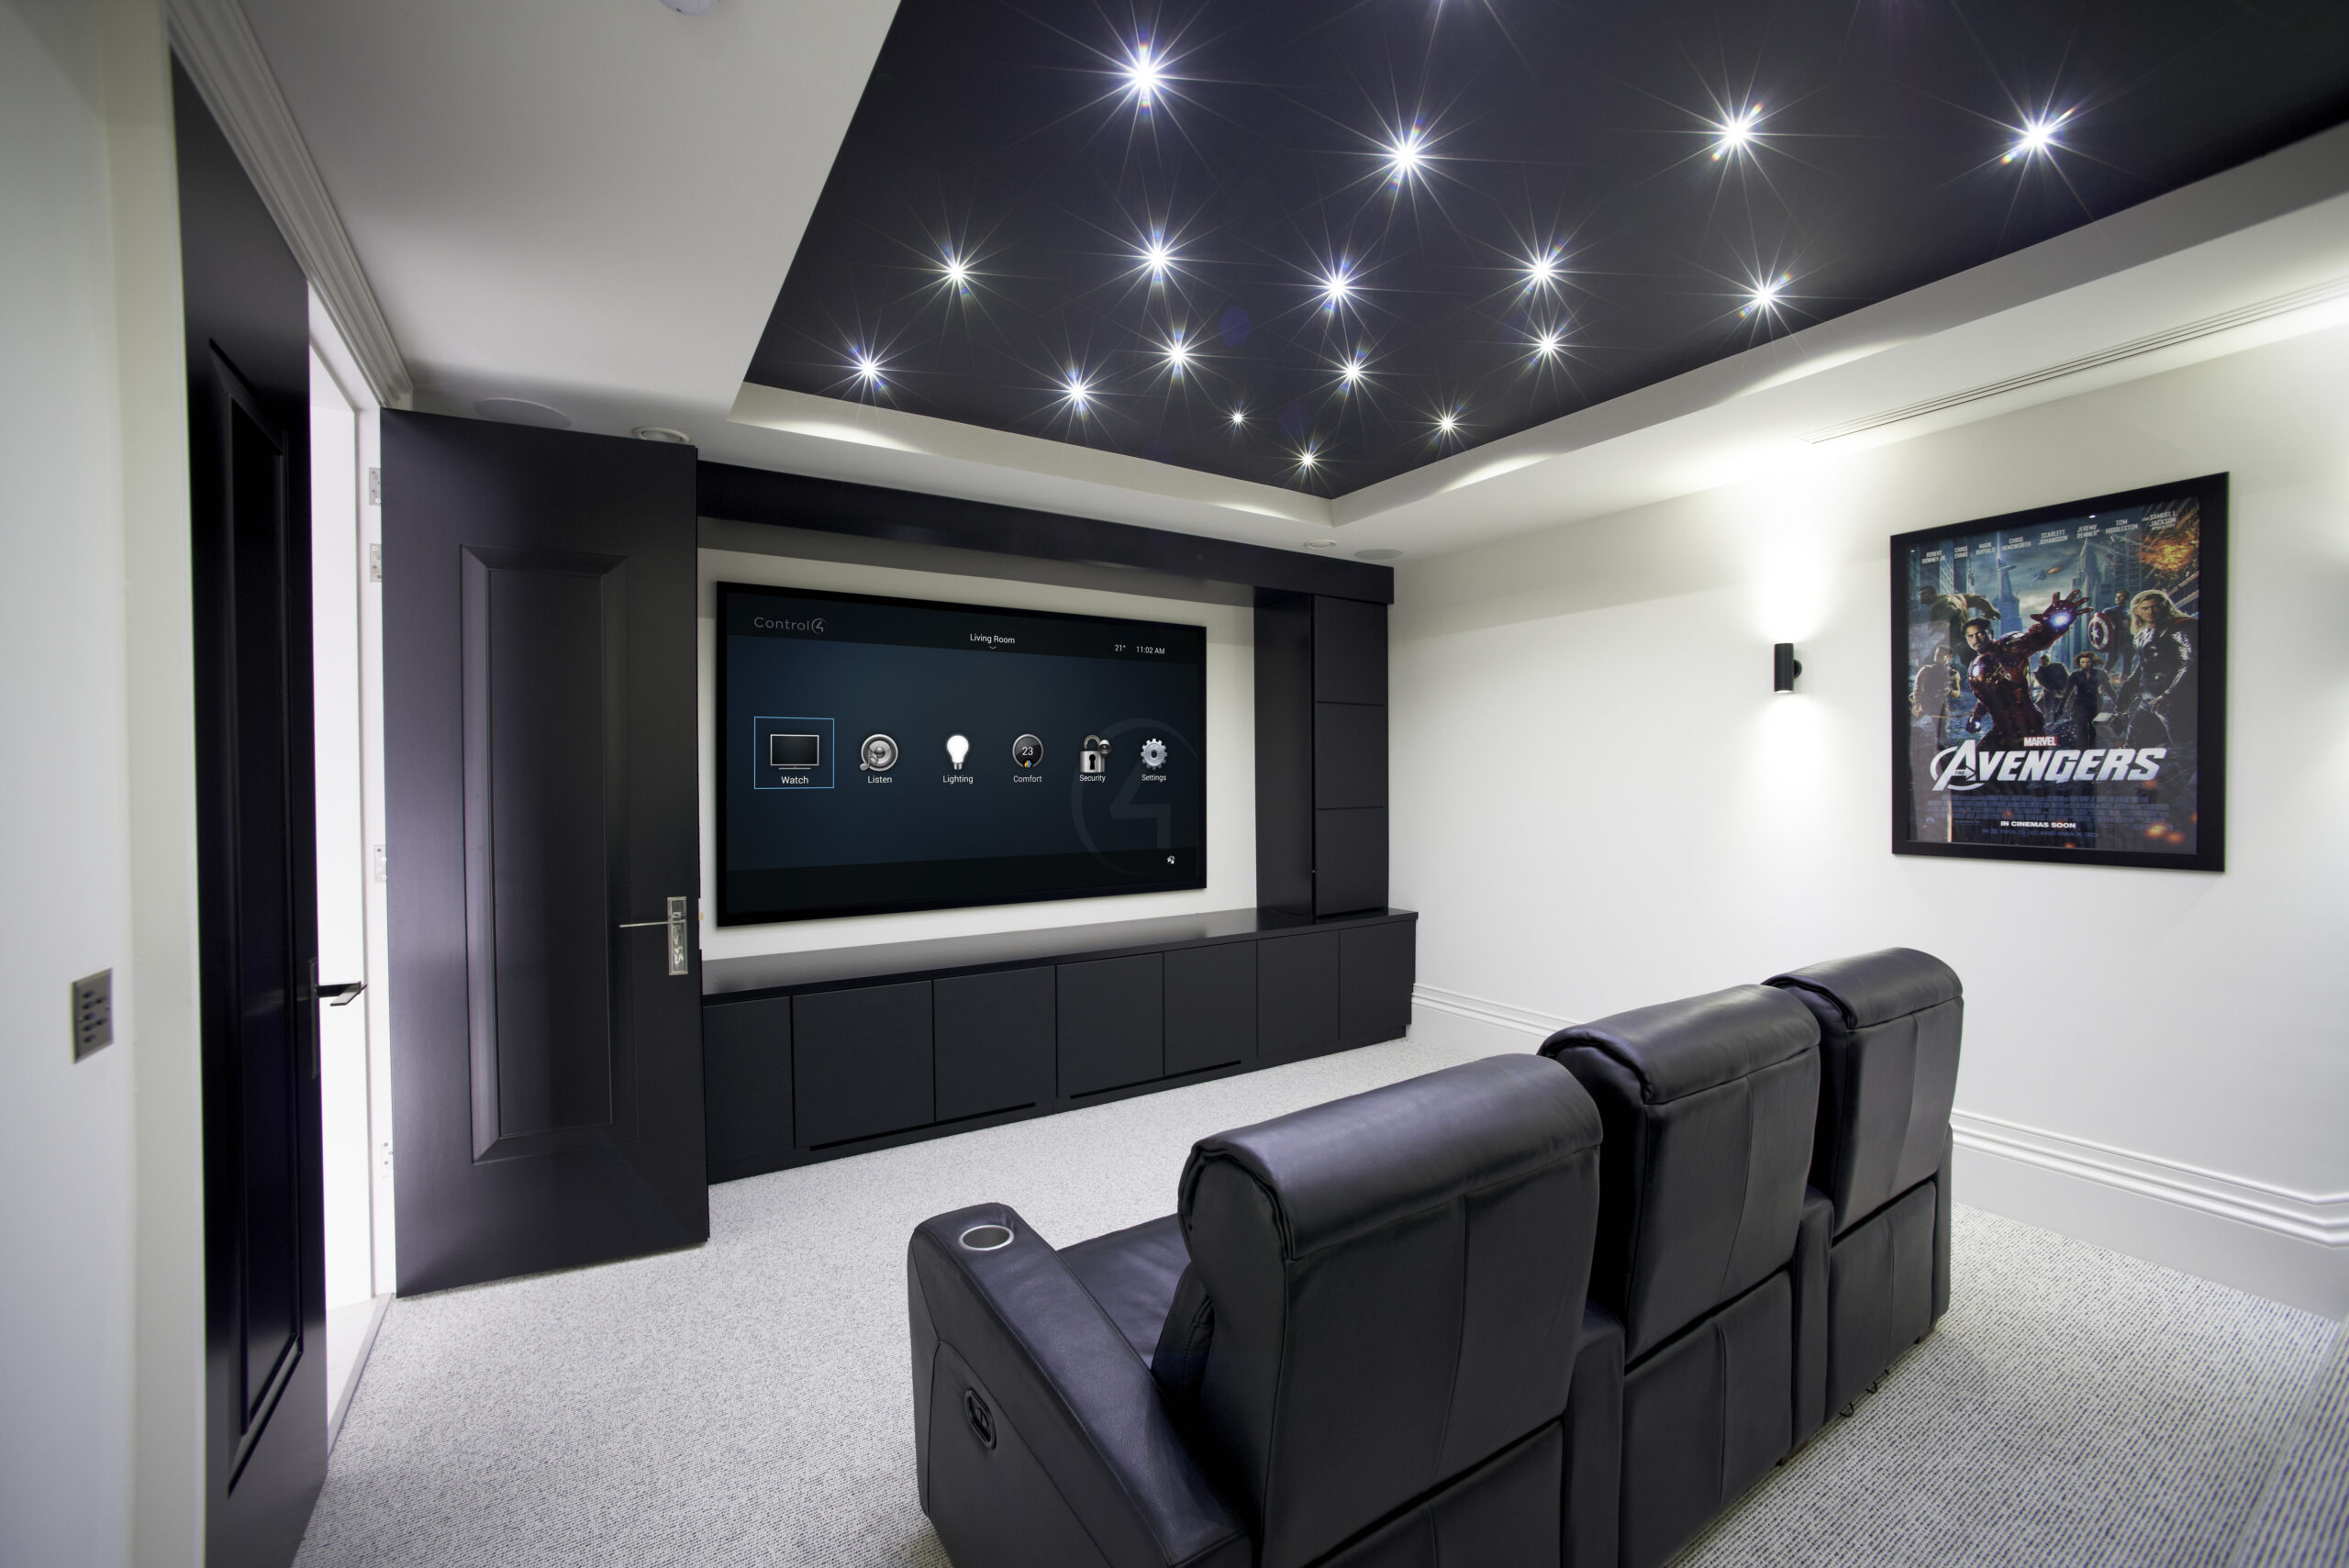 How to install a home theater